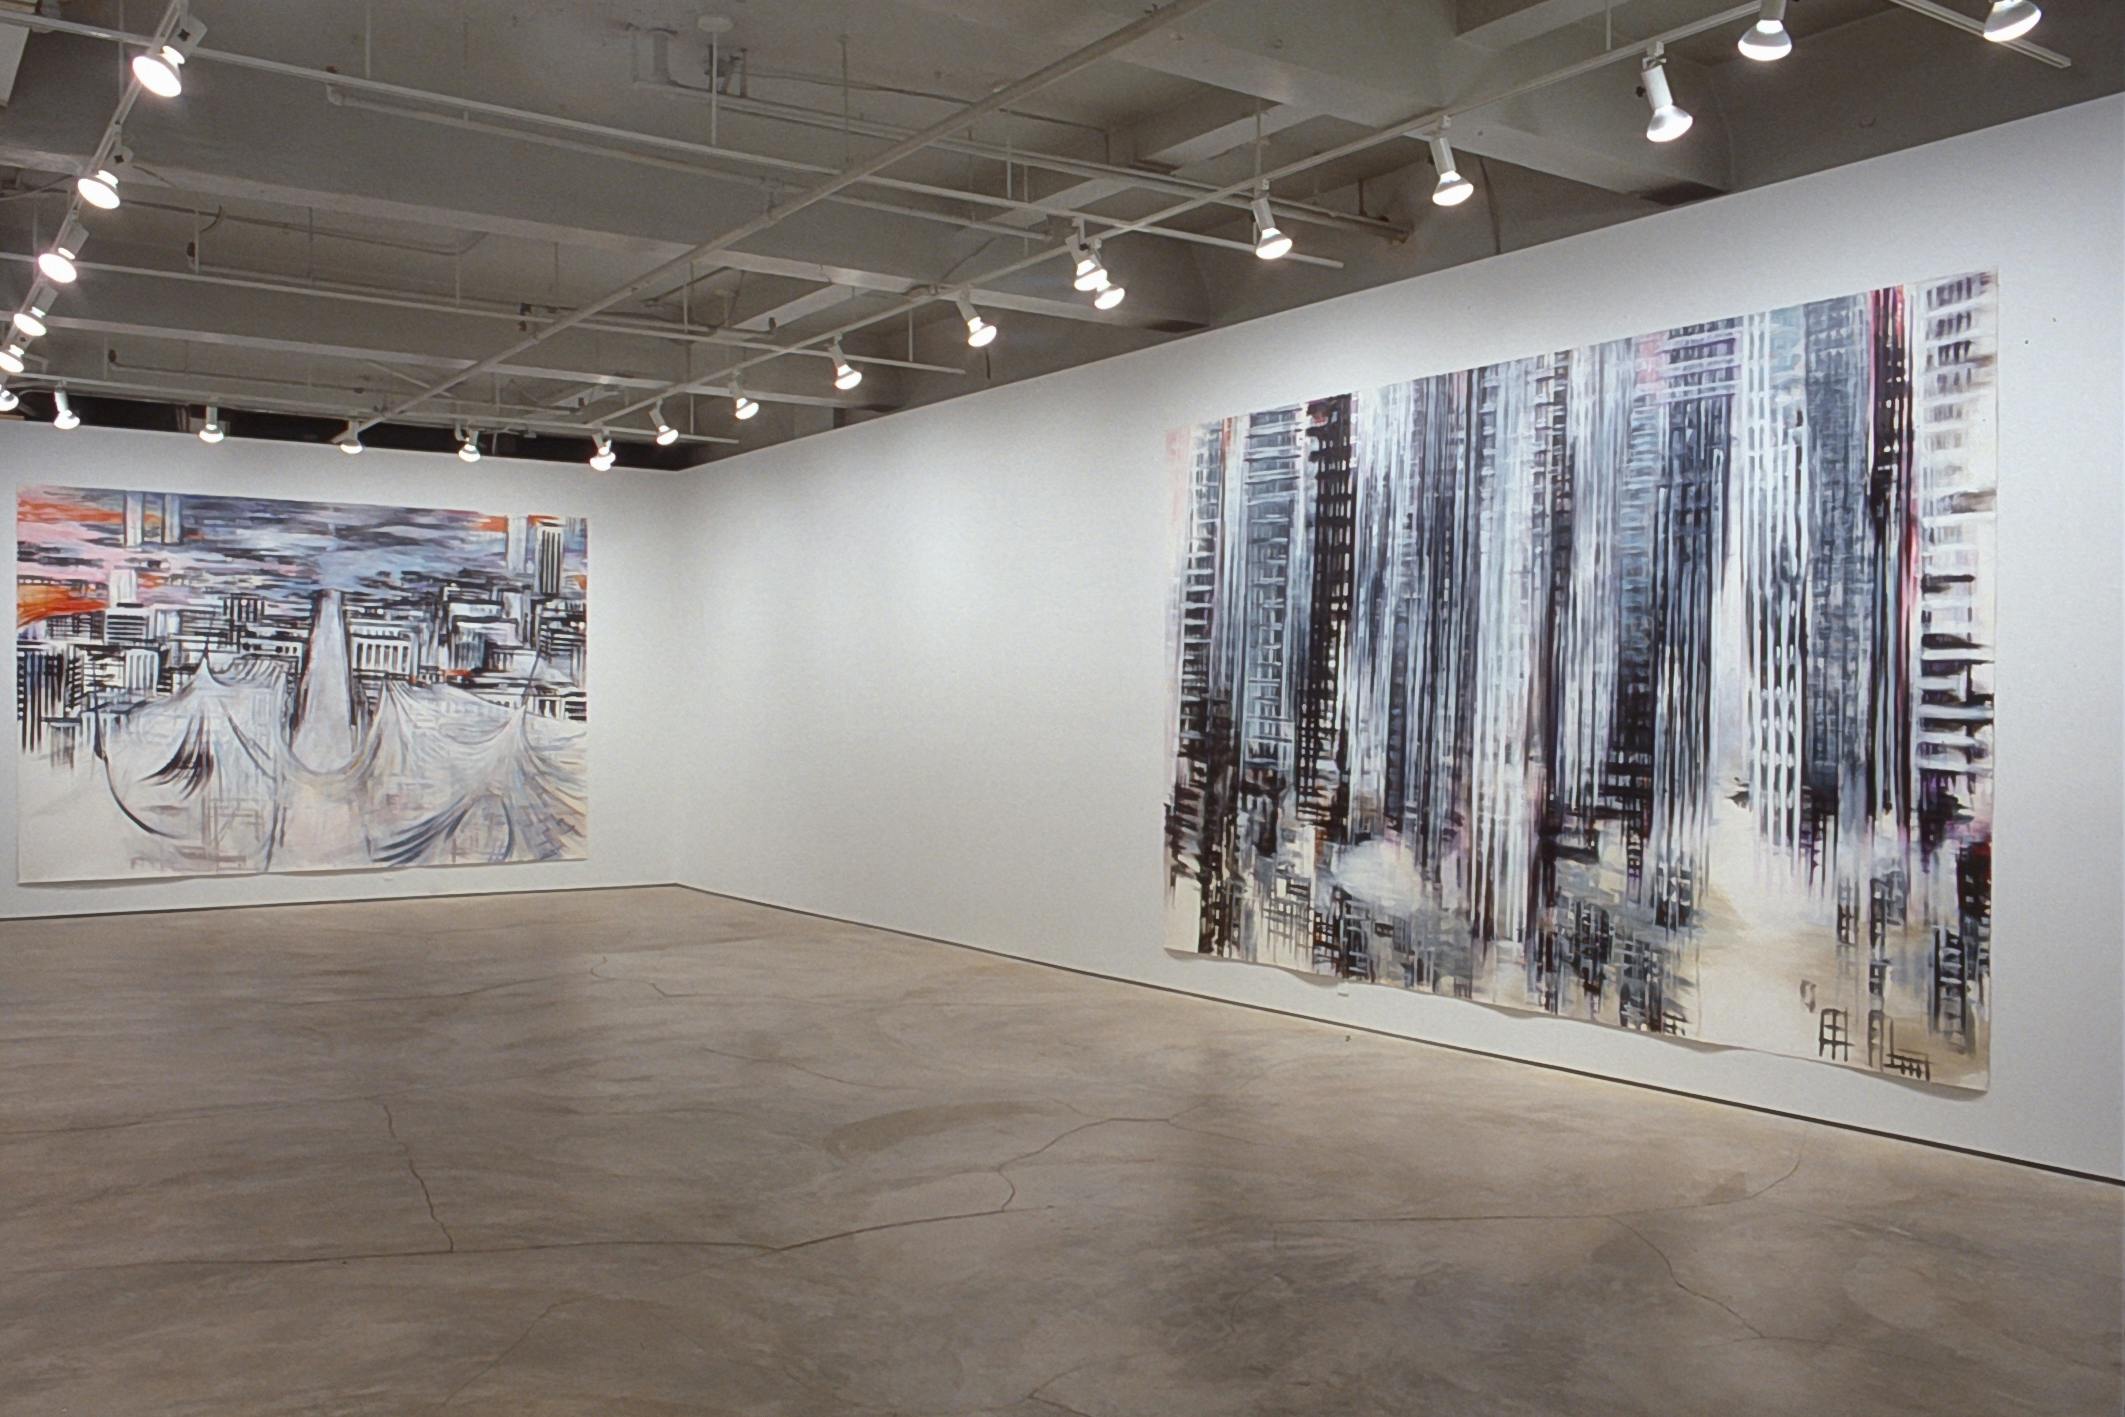 Two paintings are installed on the gallery walls. The one in the back shows an aerial view of a wide road running straight between buildings. The one in the front shows the bottoms of skyscrapers.  